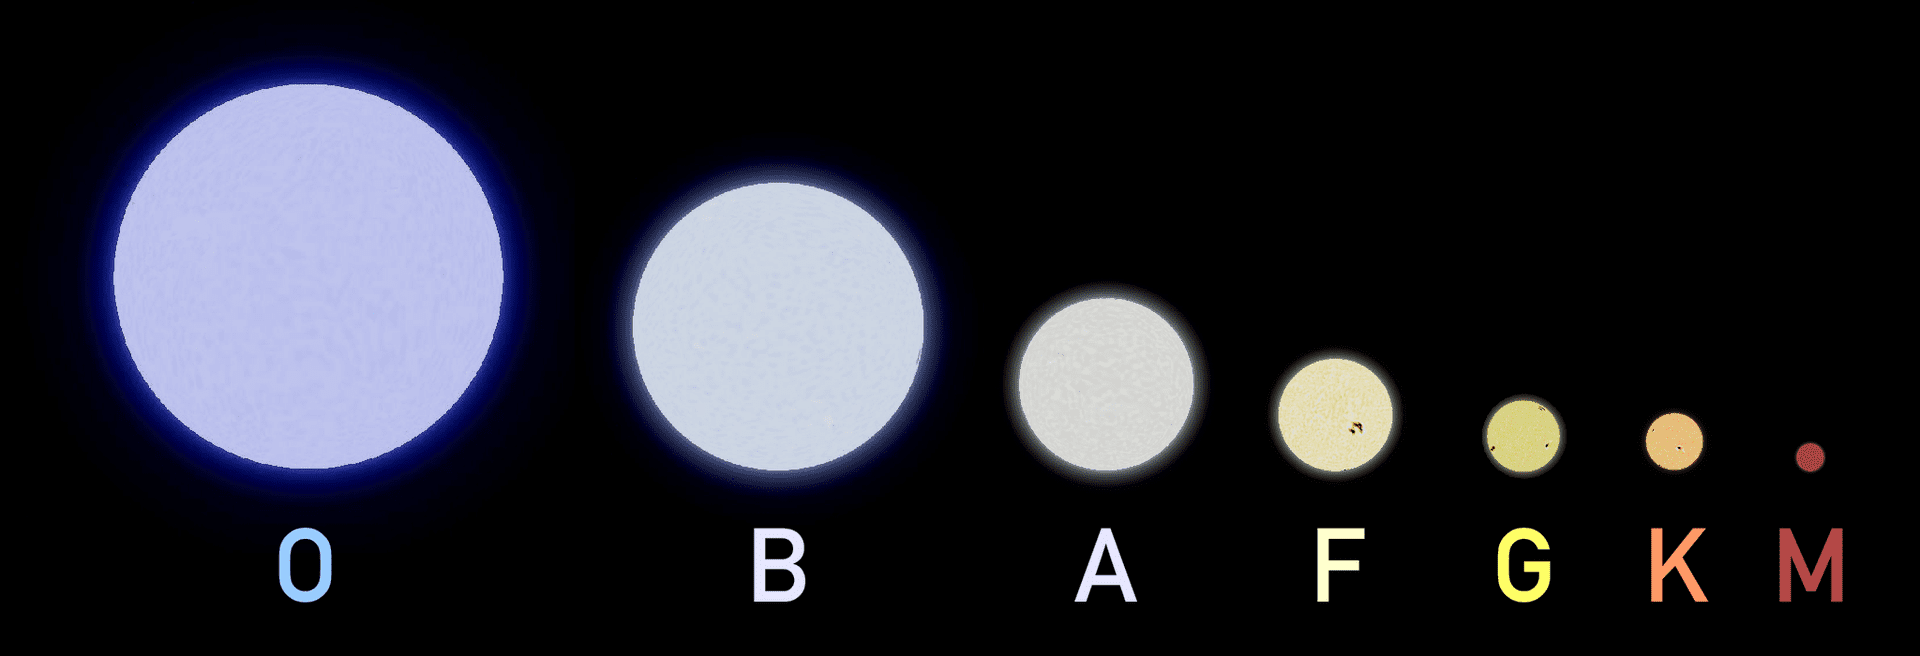 Types of Stars  Stellar Classification, Lifecycle, and Charts